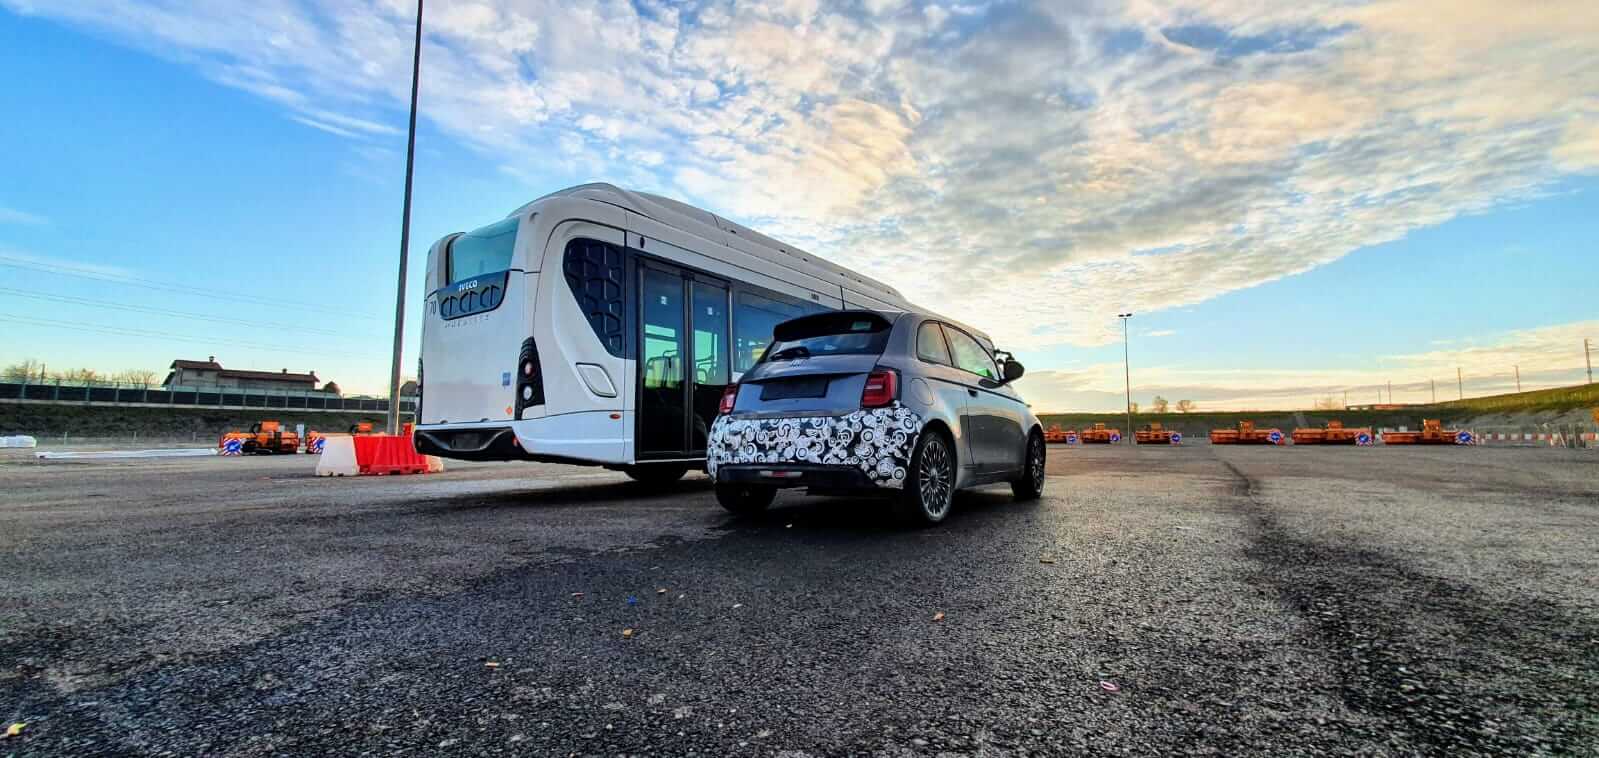 Arena of the future pilot - Electreon powers Iveco bus and Fiat 500 (Stellantis passenger vehicle)